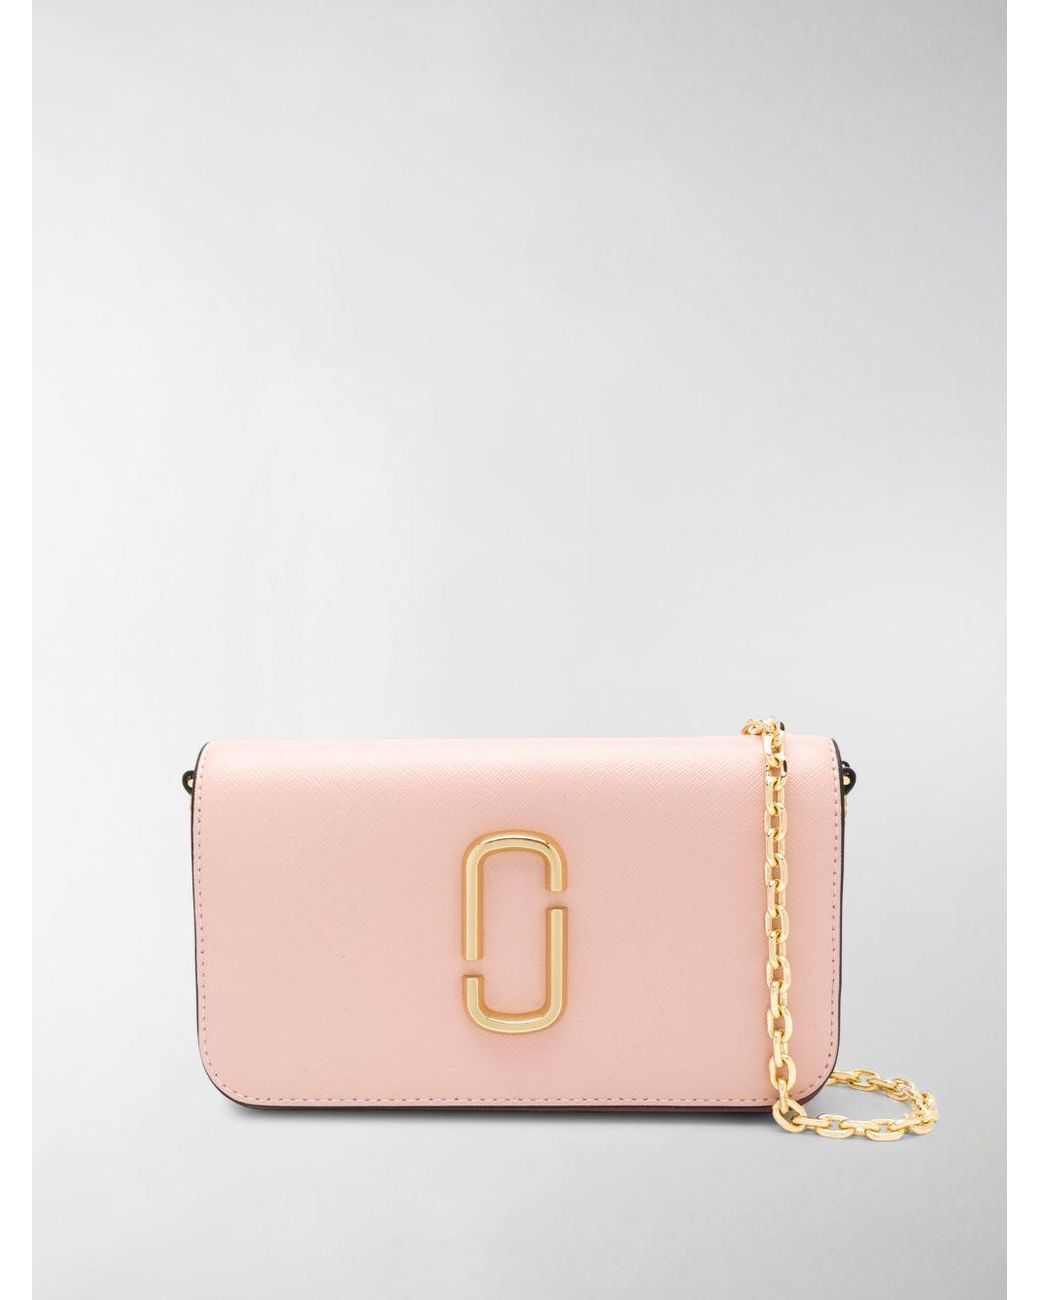 Marc Jacobs Leather Cross-body Bag in Pink - Lyst